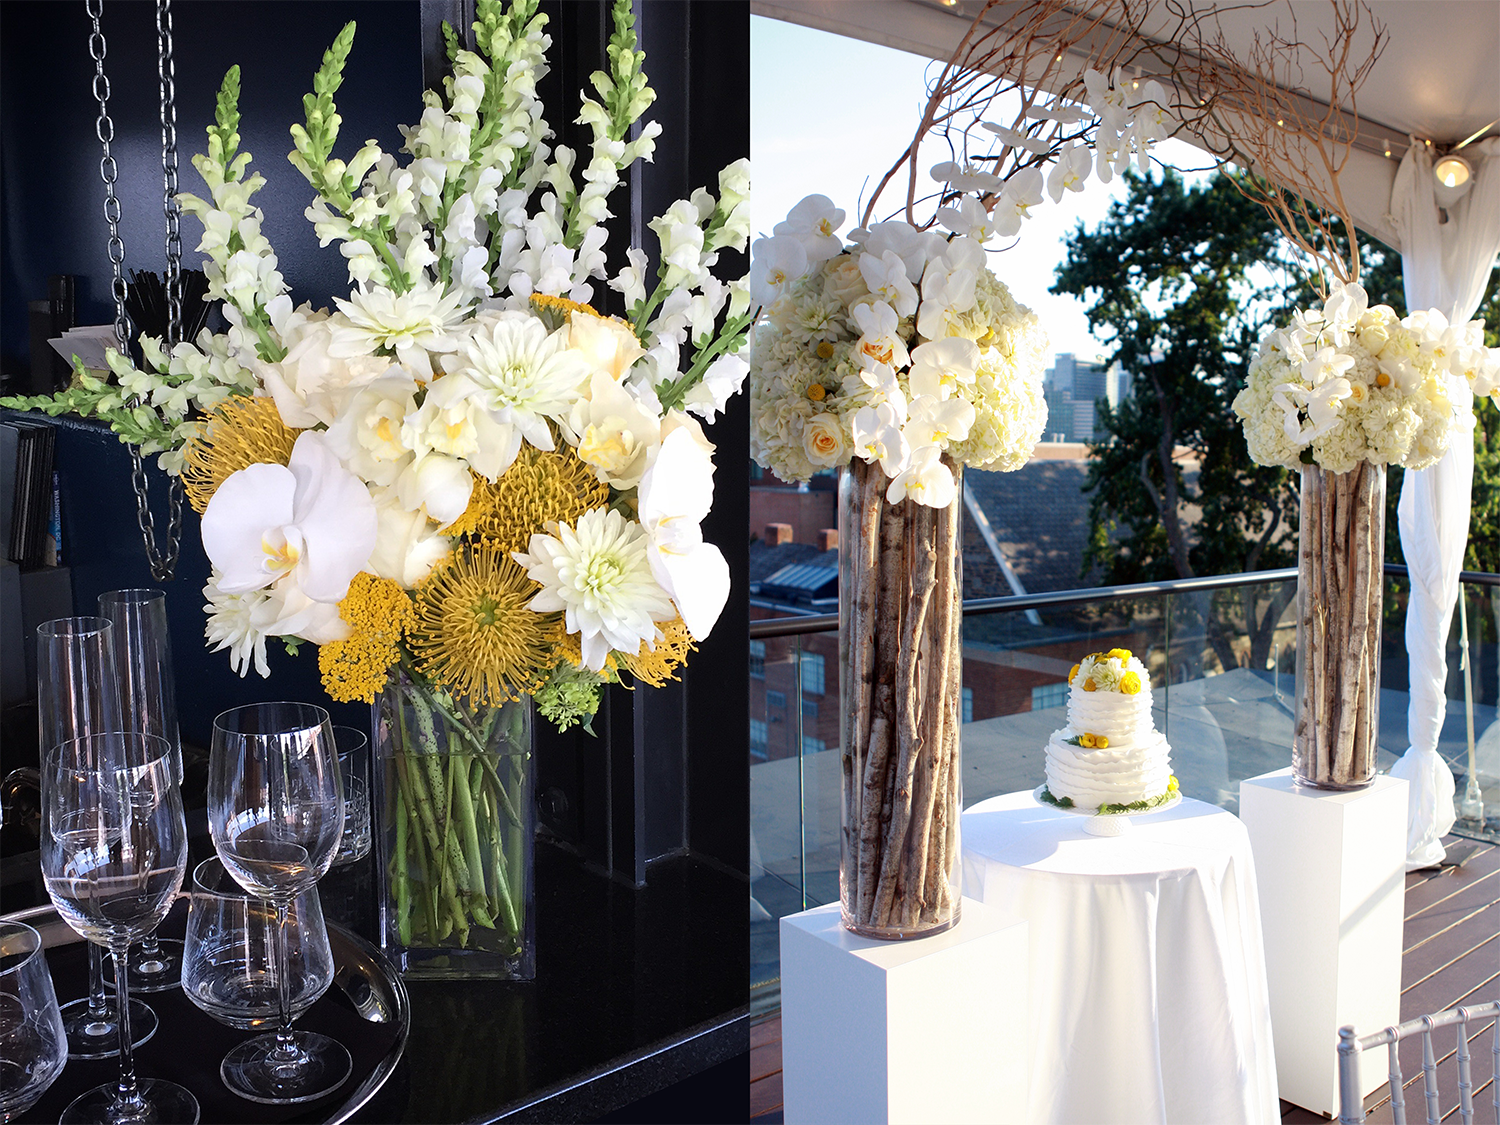 Bouquet of tall white and yellow flowers next to a tray of drinking glasses. Two tall vases of decorative branches and white flowers creating an arch over a wedding cake.